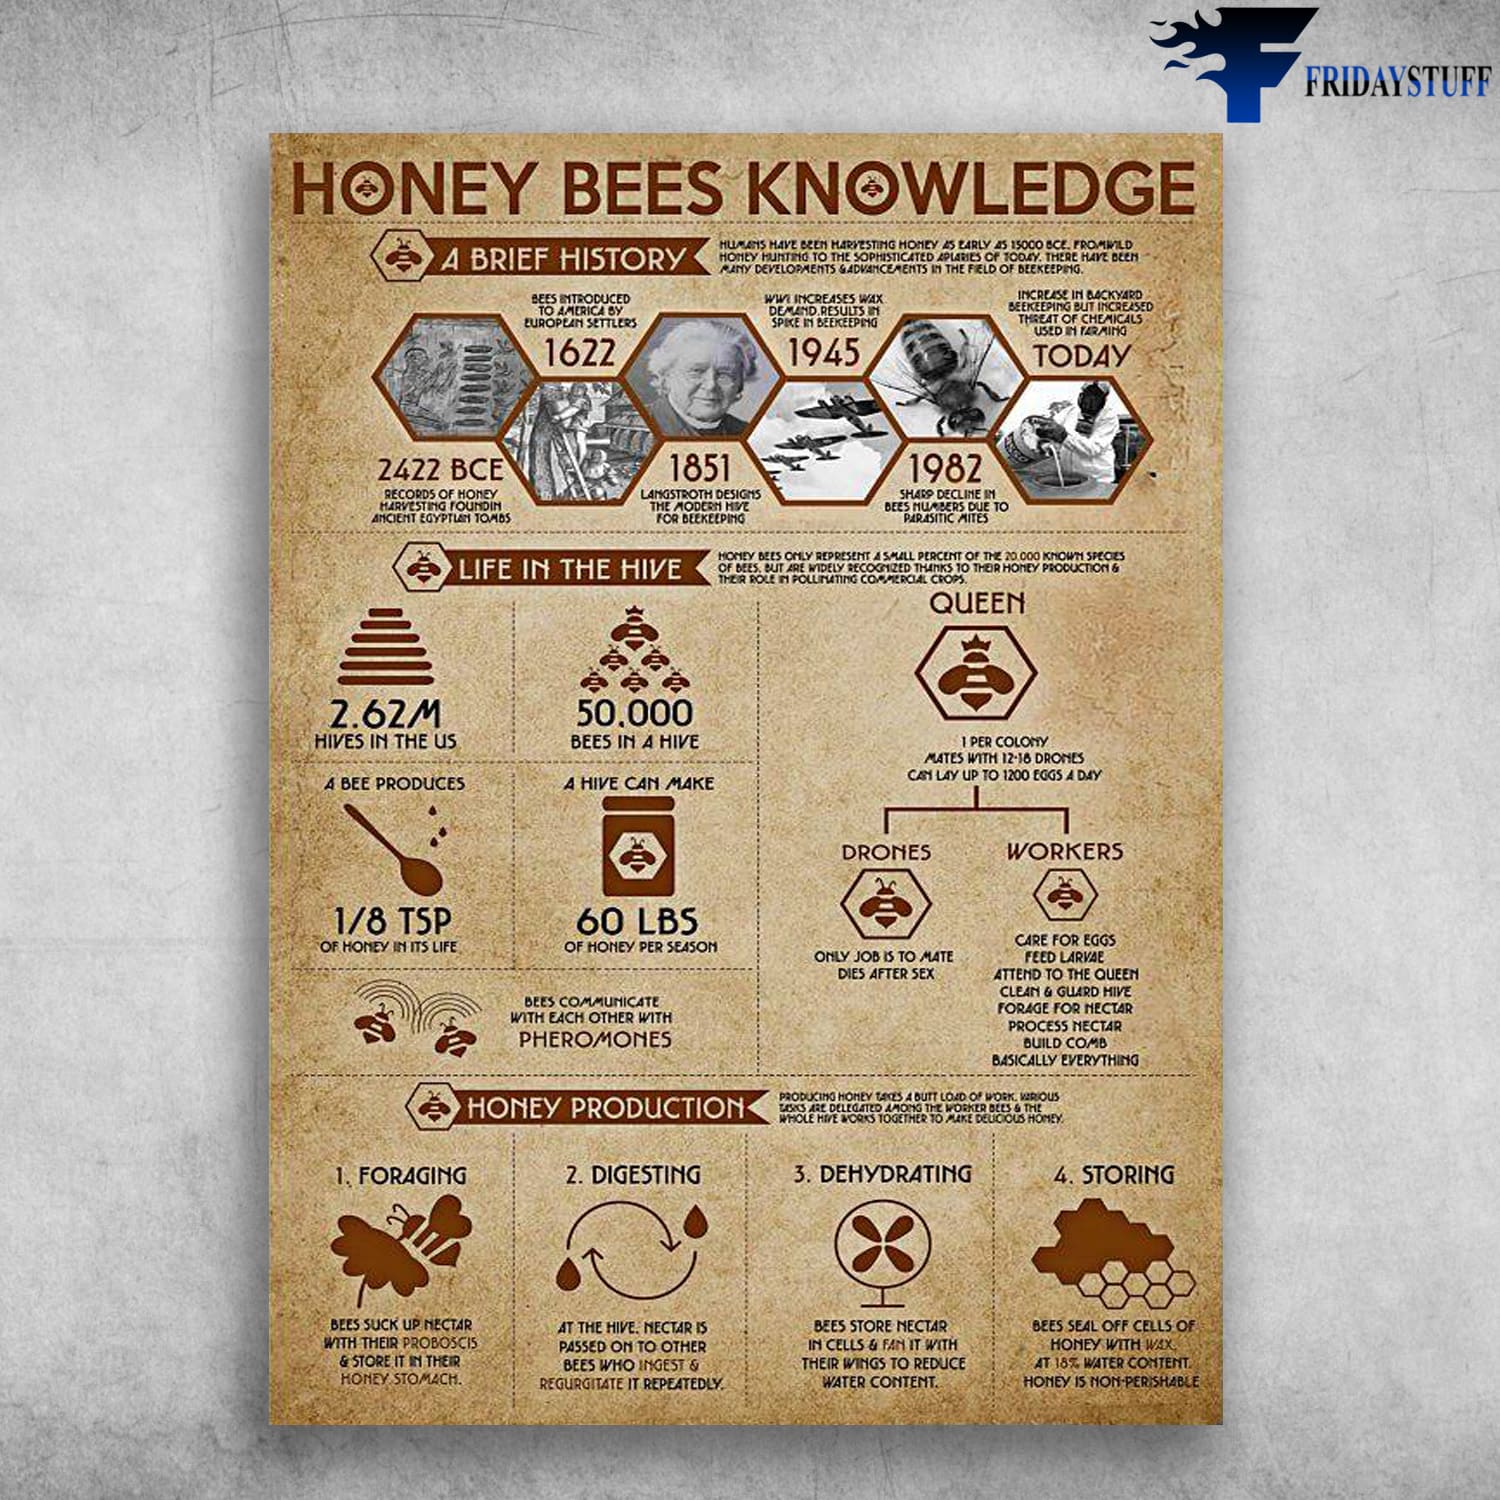 Honey Bees Knowledge, History Of Honney, Bee Keeper, Honey Production